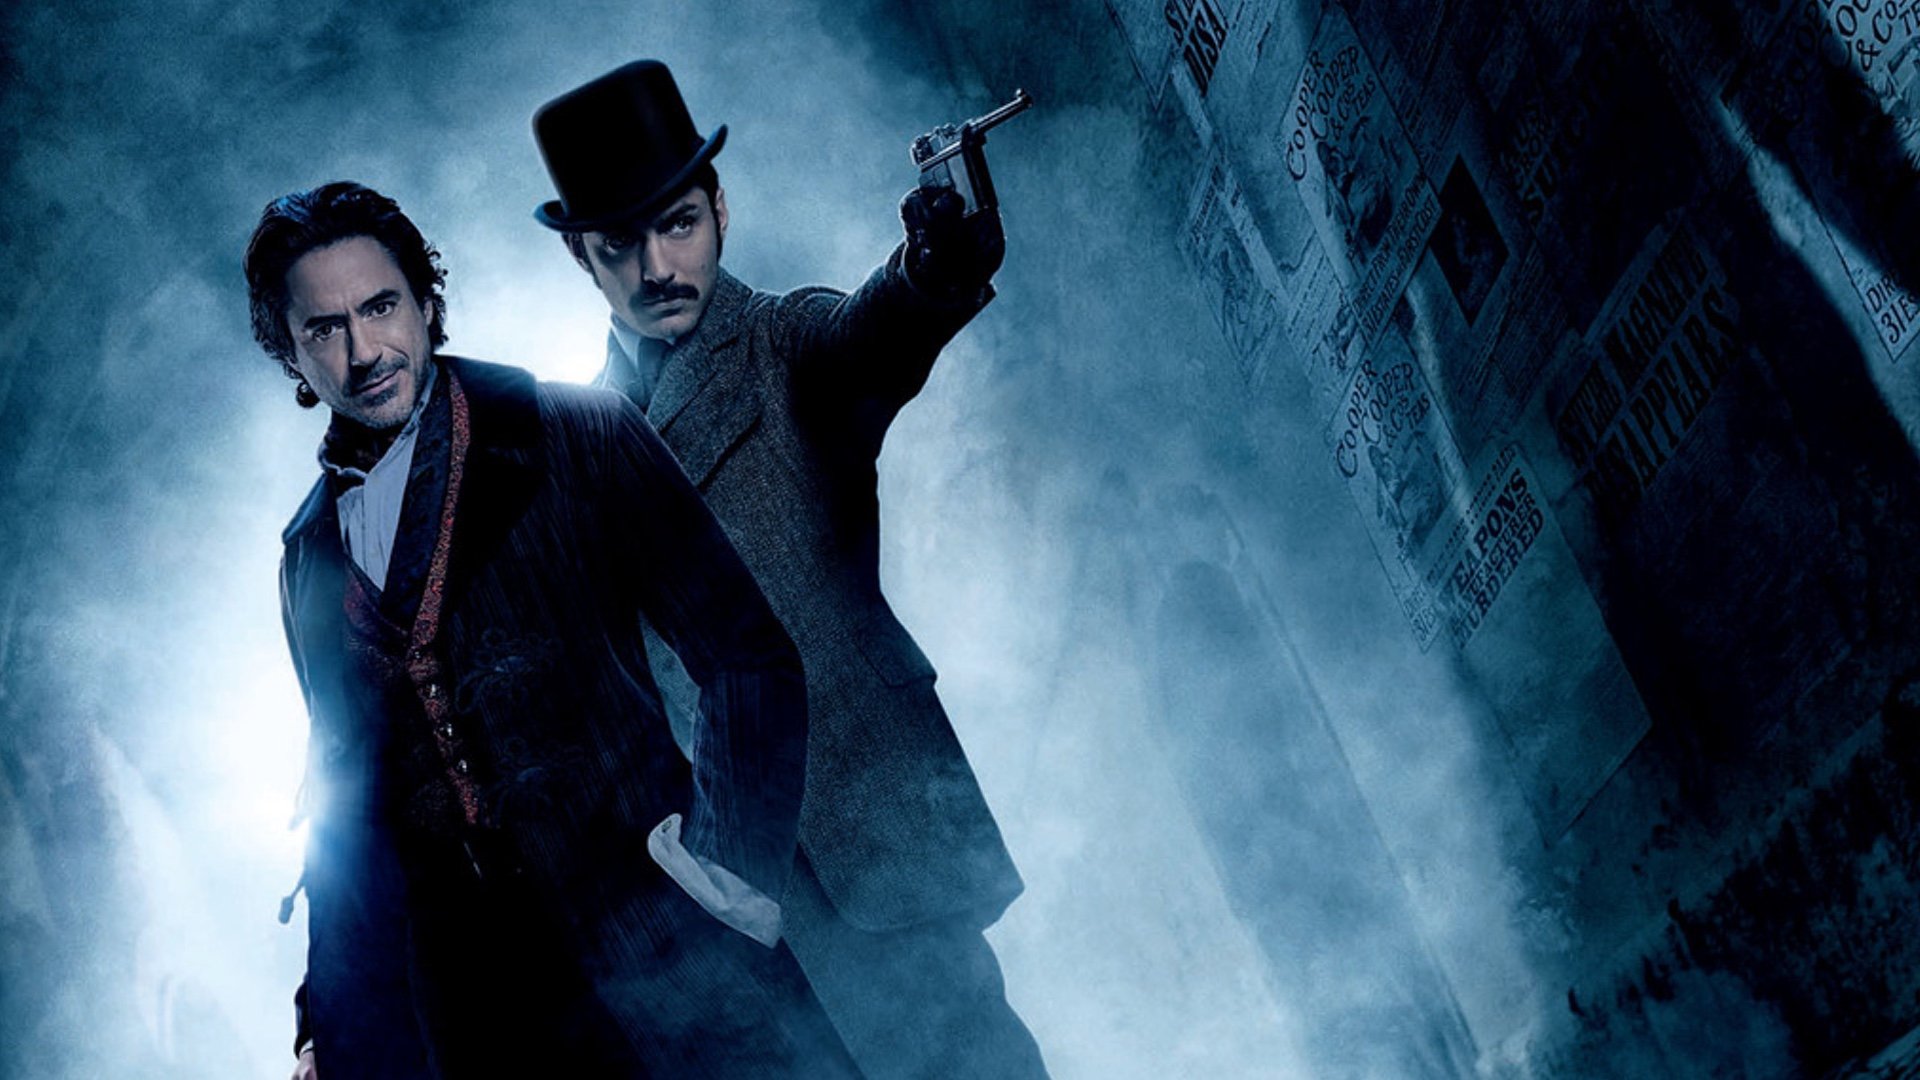 Robert Downey Jr. is desperate to take up his role as Sherlock once again. Is 'Sherlock Holmes 3' going to happen?